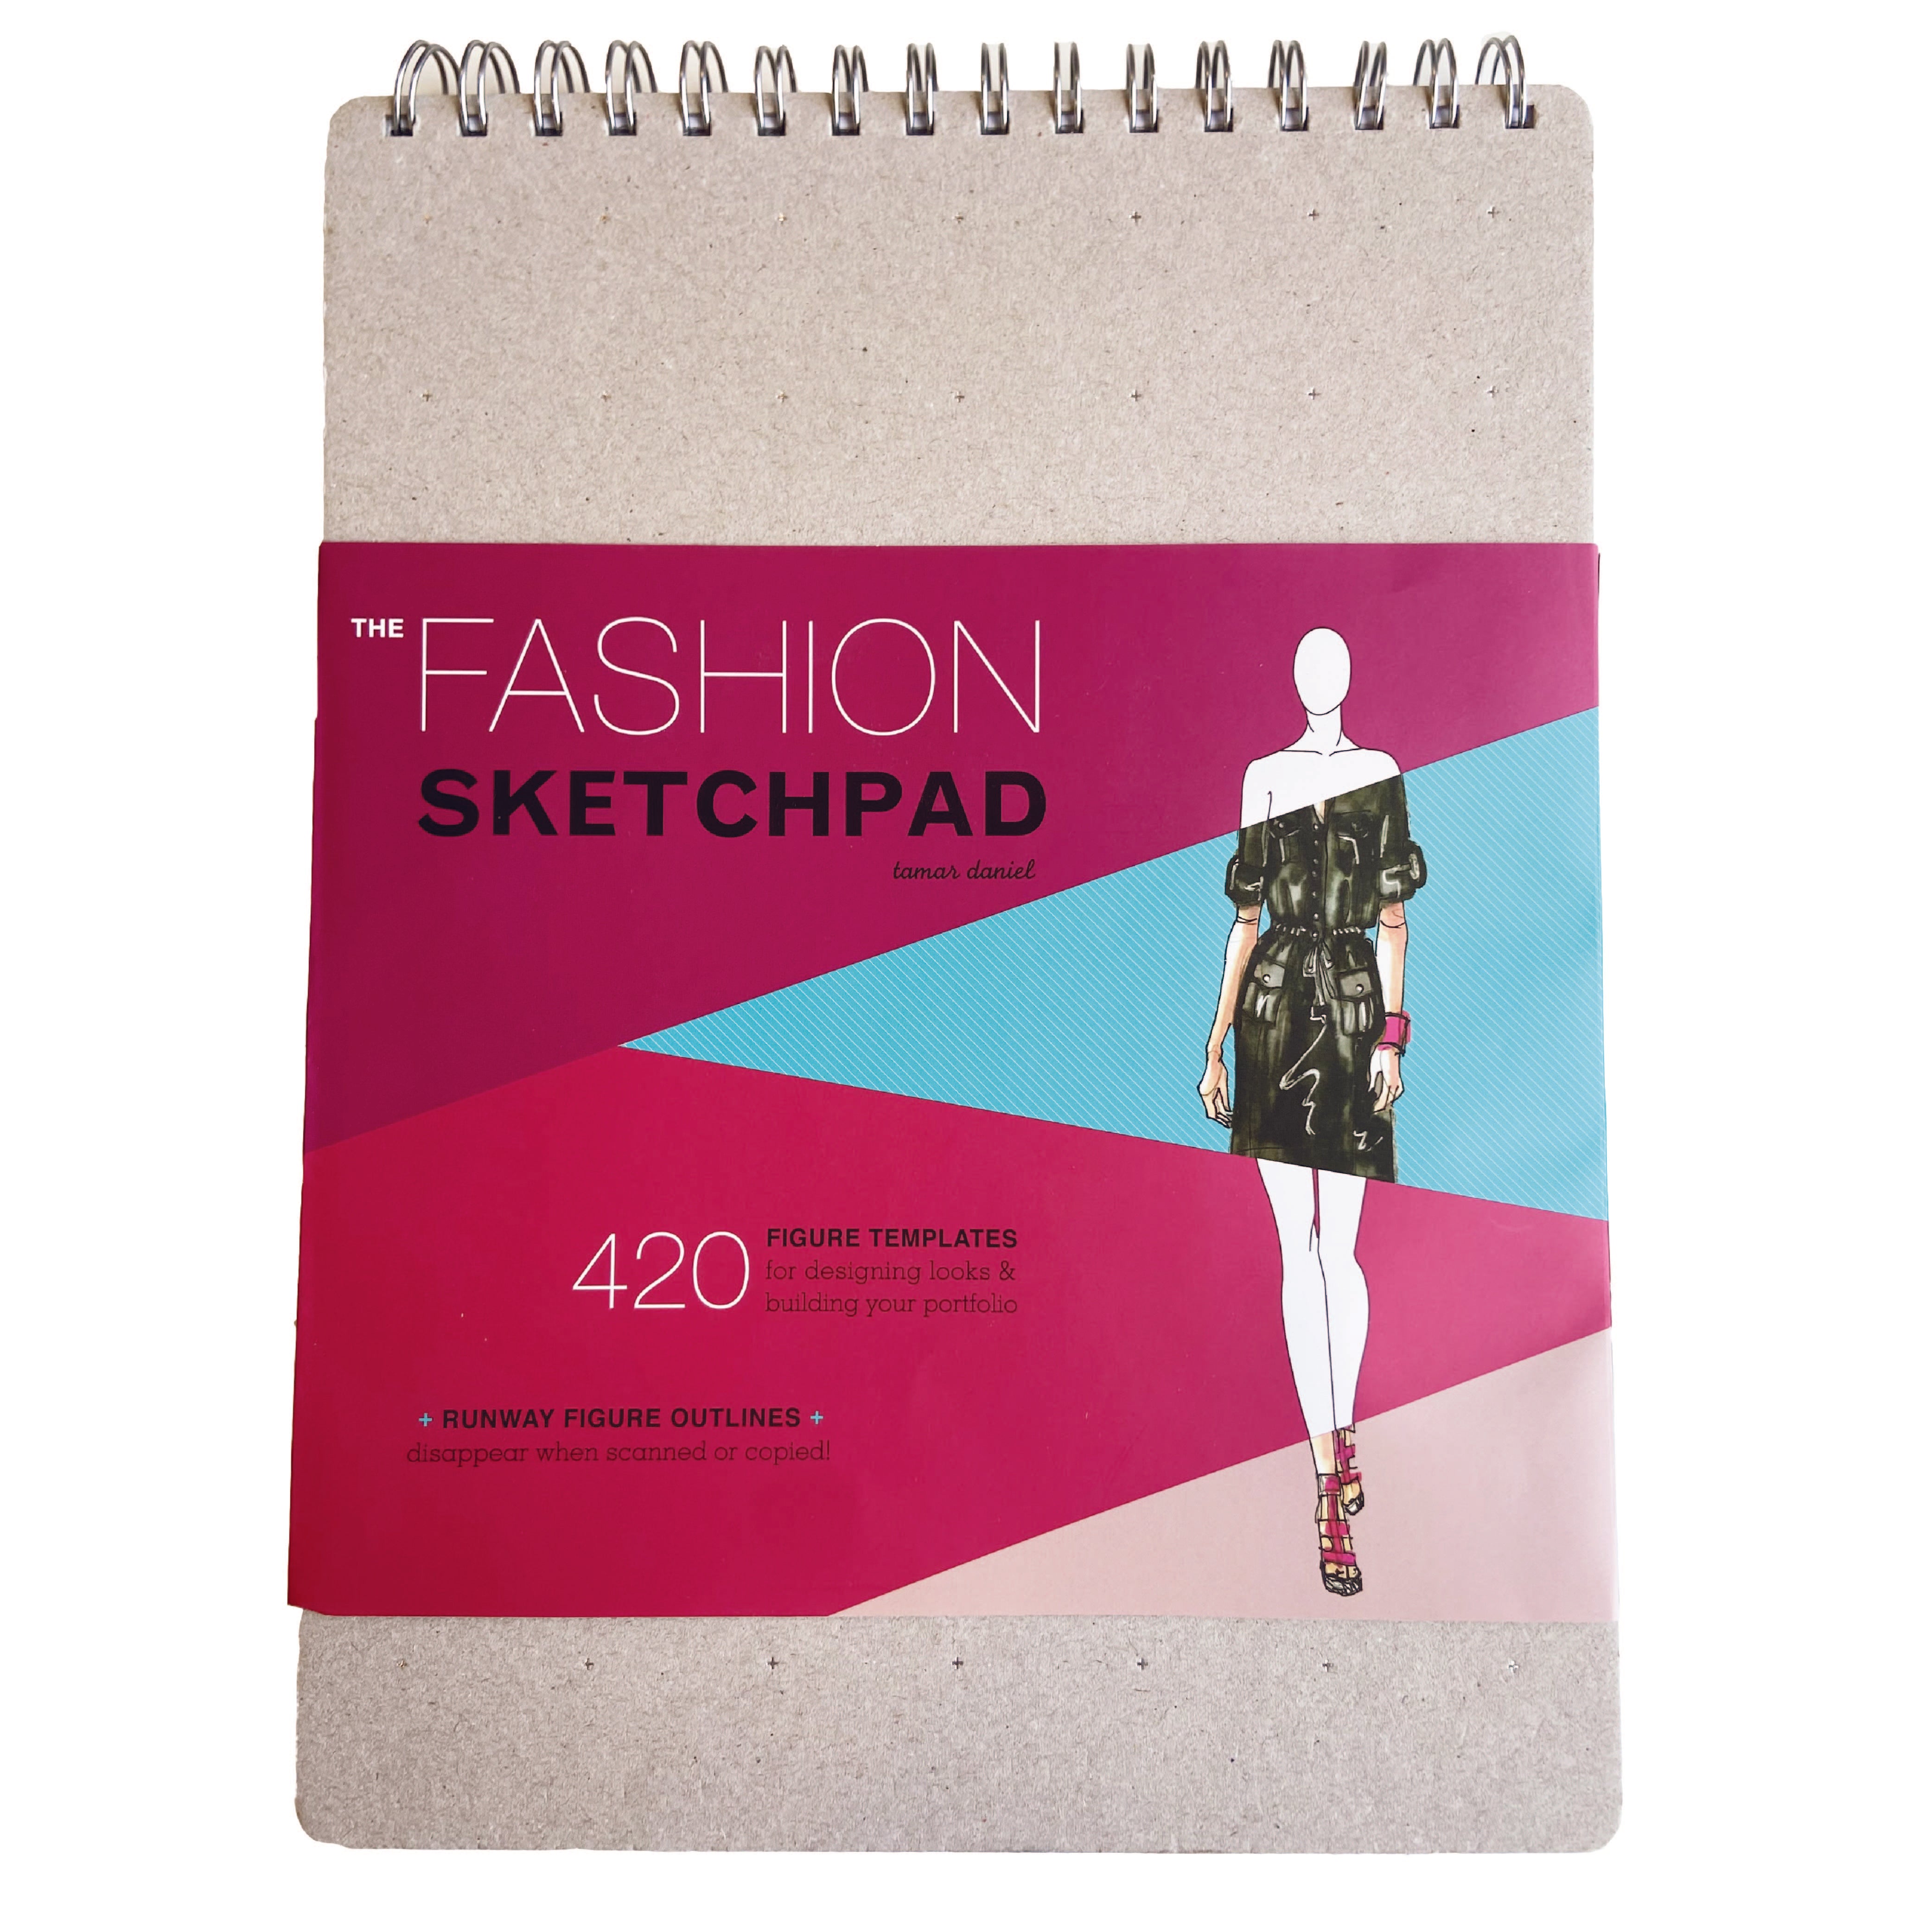 The Fashion Sketchpad: 420 Figure Templates for Designing Looks and  Building Your Portfolio (Drawing Books, Fashion Books, Fashion Design  Books